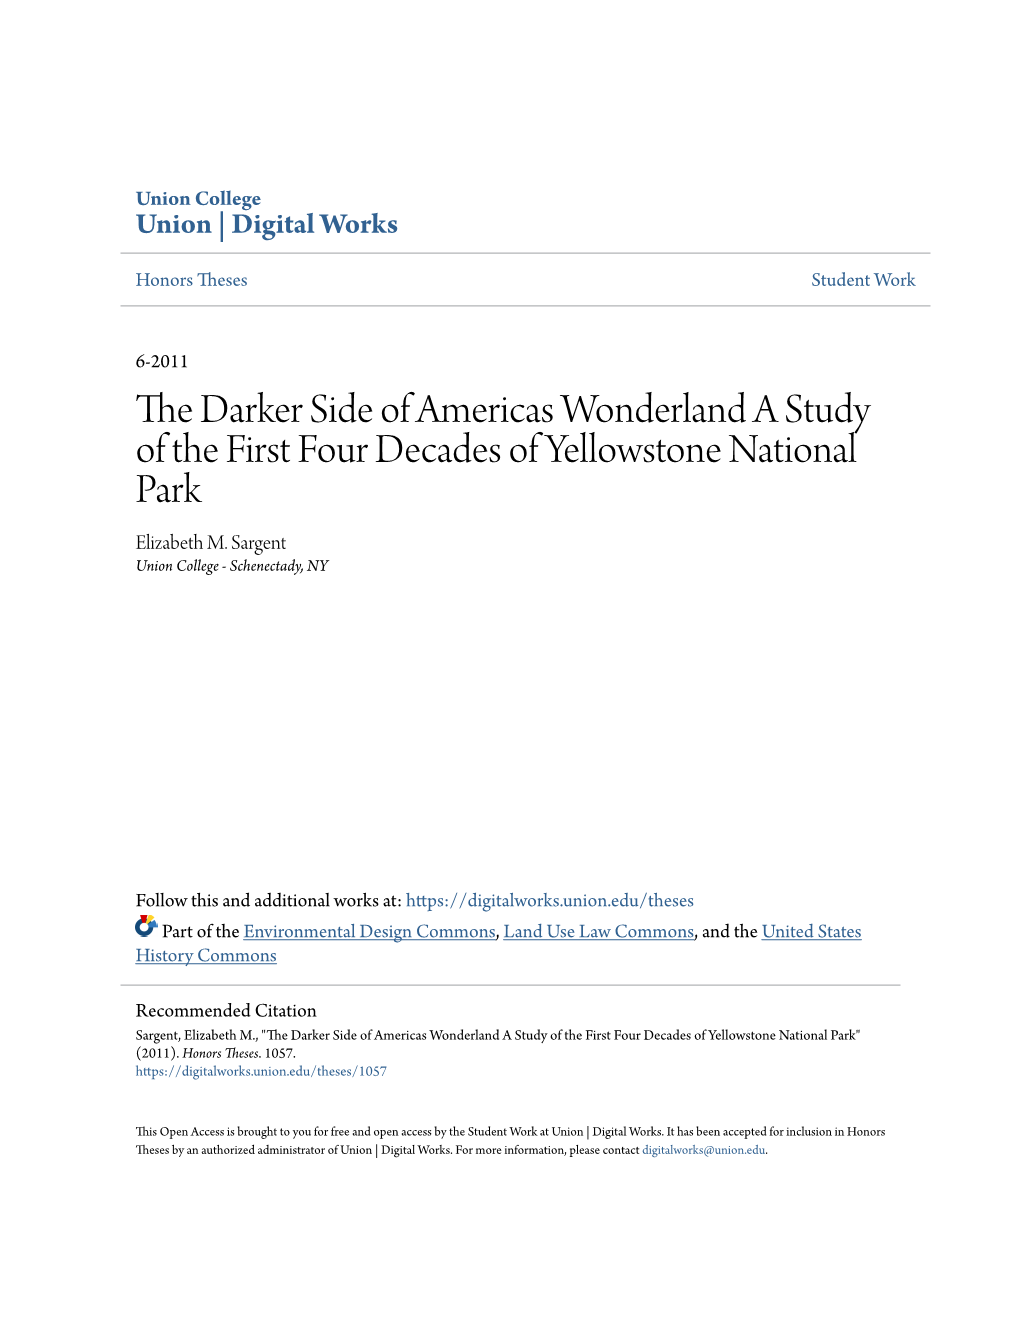 The Darker Side of Americas Wonderland a Study of the First